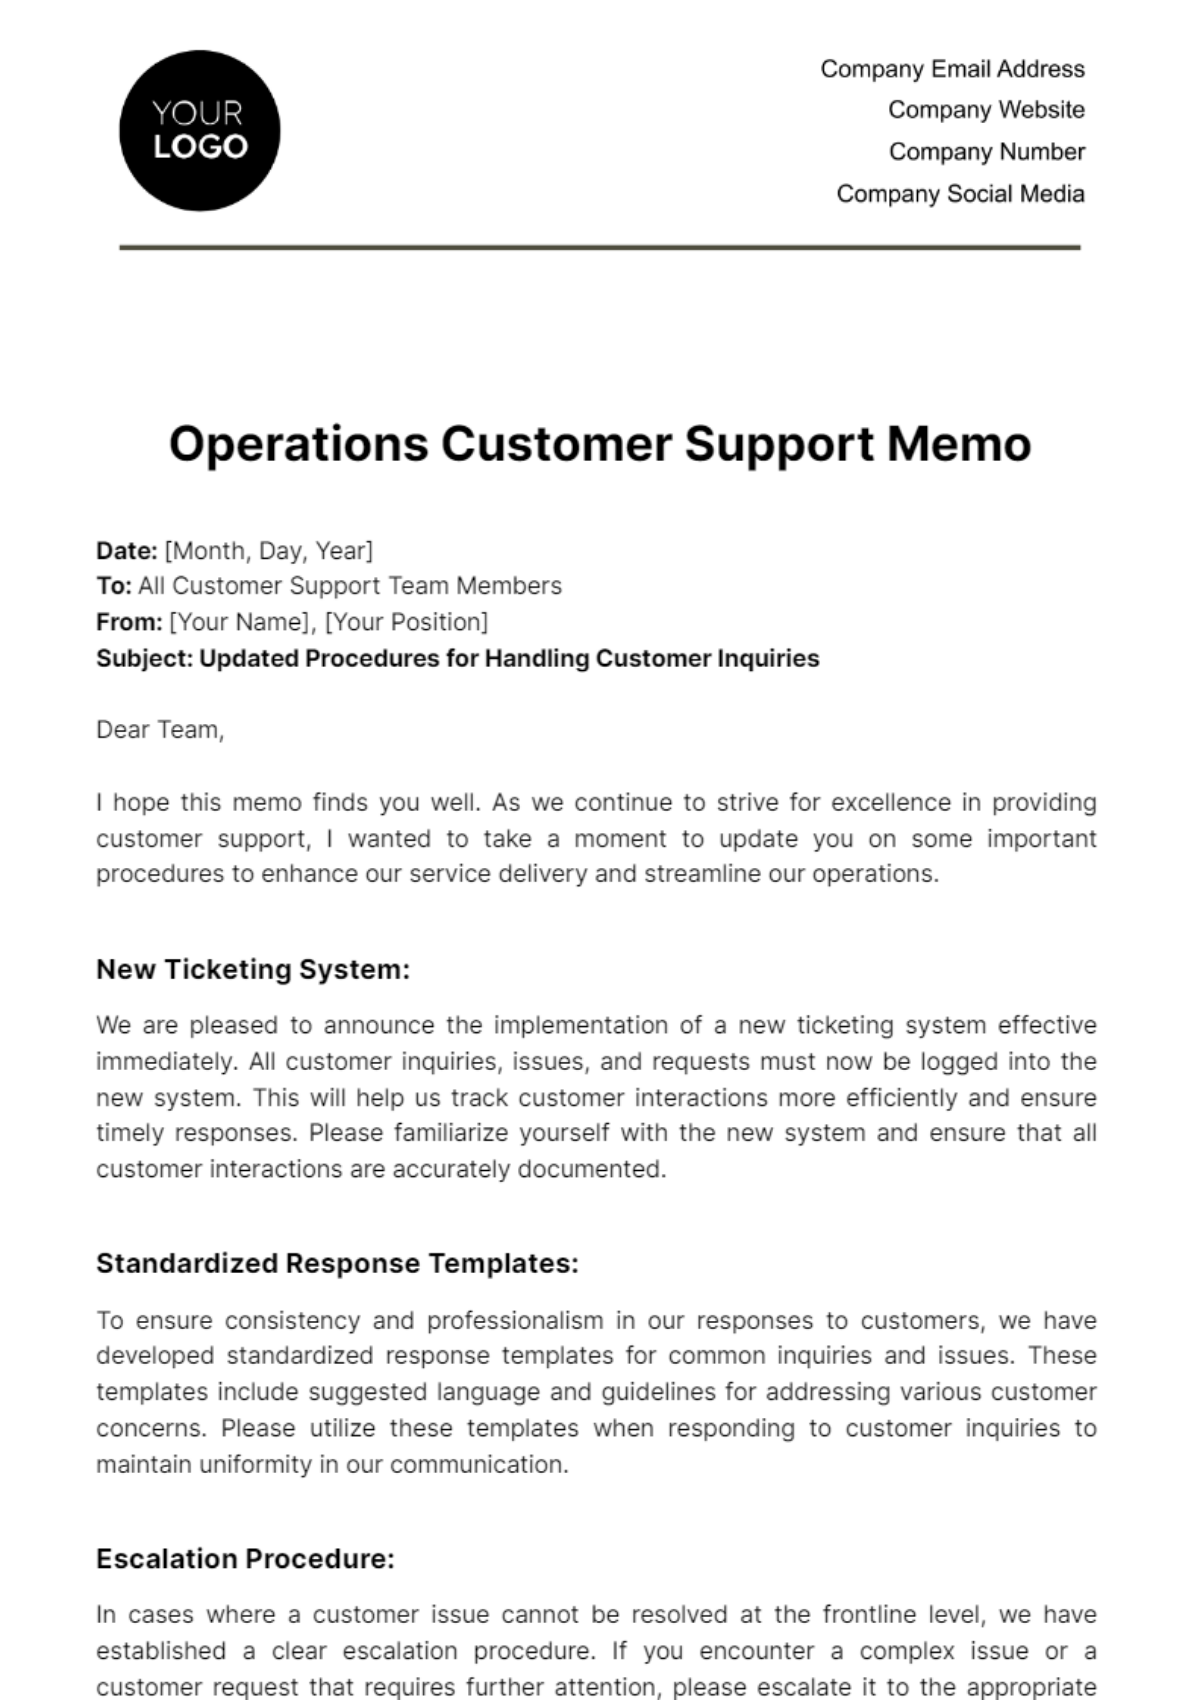 Free Operations Customer Support Memo Template